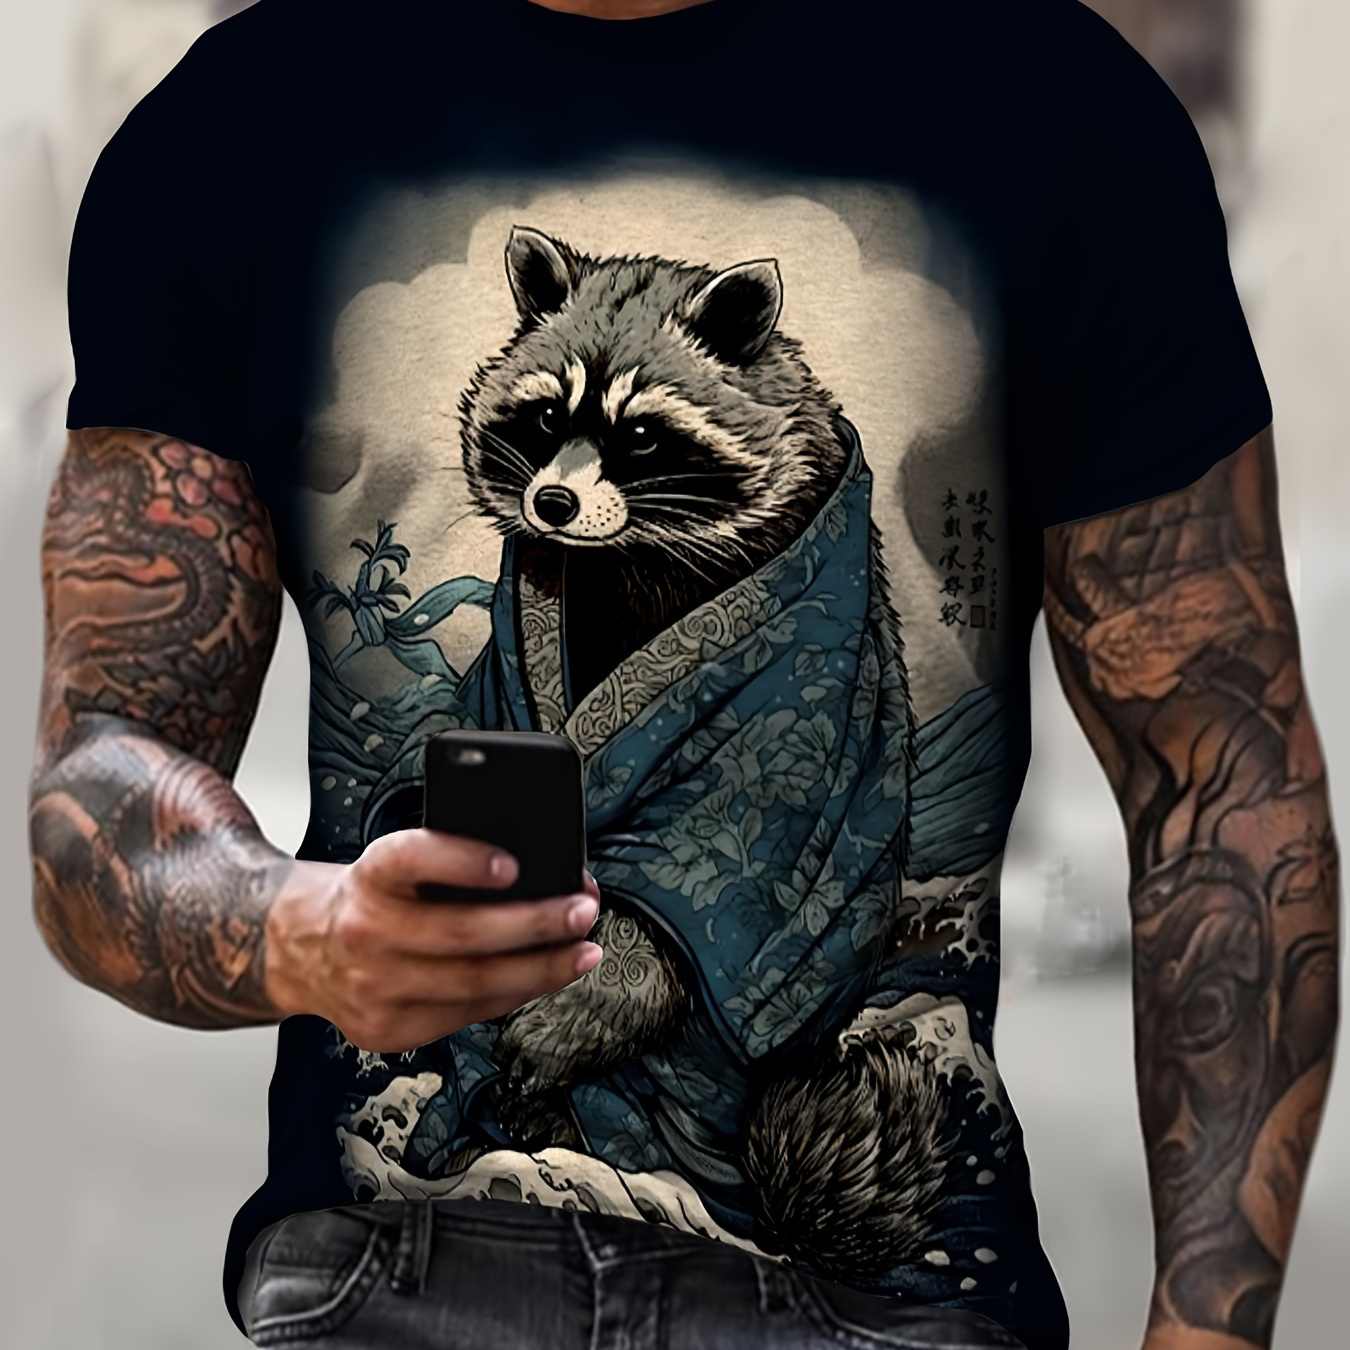 

Men's Cartoon Style Raccoon With Blanket Pattern Short Sleeve Crew Neck T-shirt, Tees For Men, Chic And Trendy Tops For Summer Street Wear